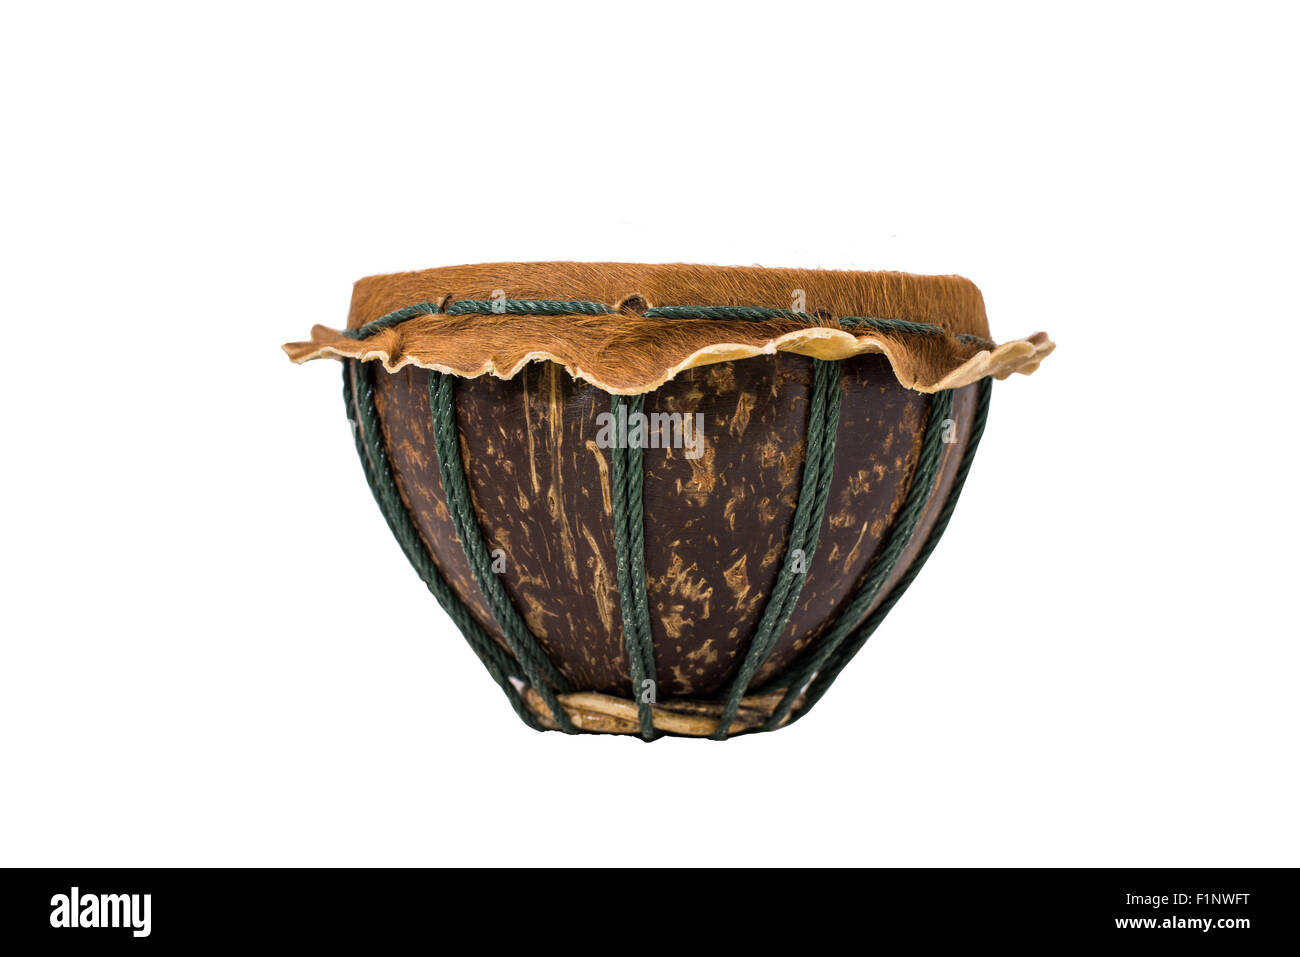 The coconut shell drum with isolate style Stock Photo